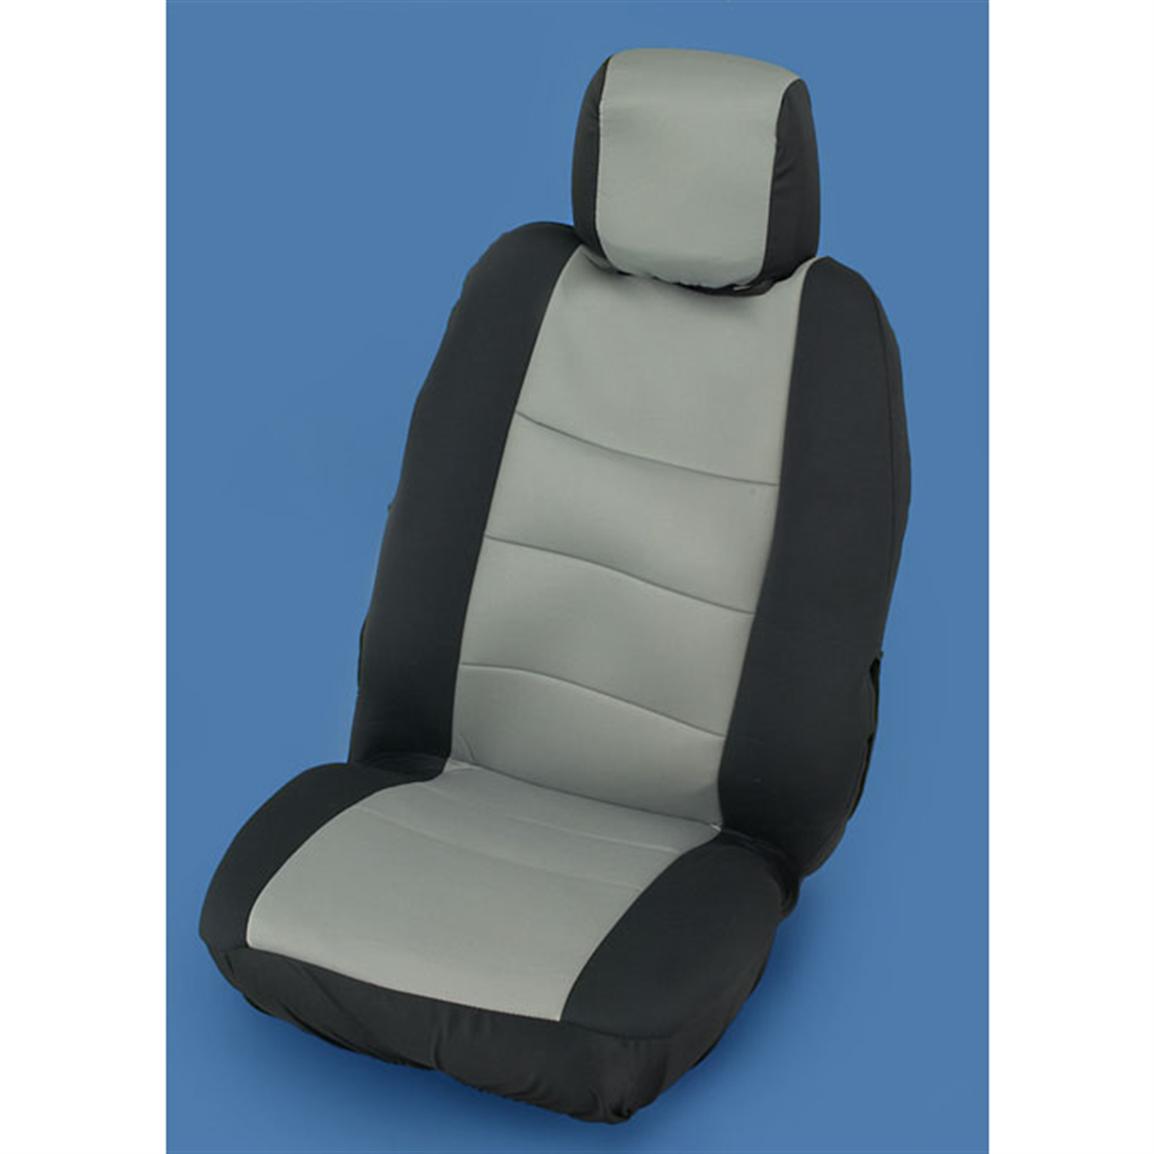 2 CoverKing Low - back Universal Seat Covers - 89509, Seat Covers at